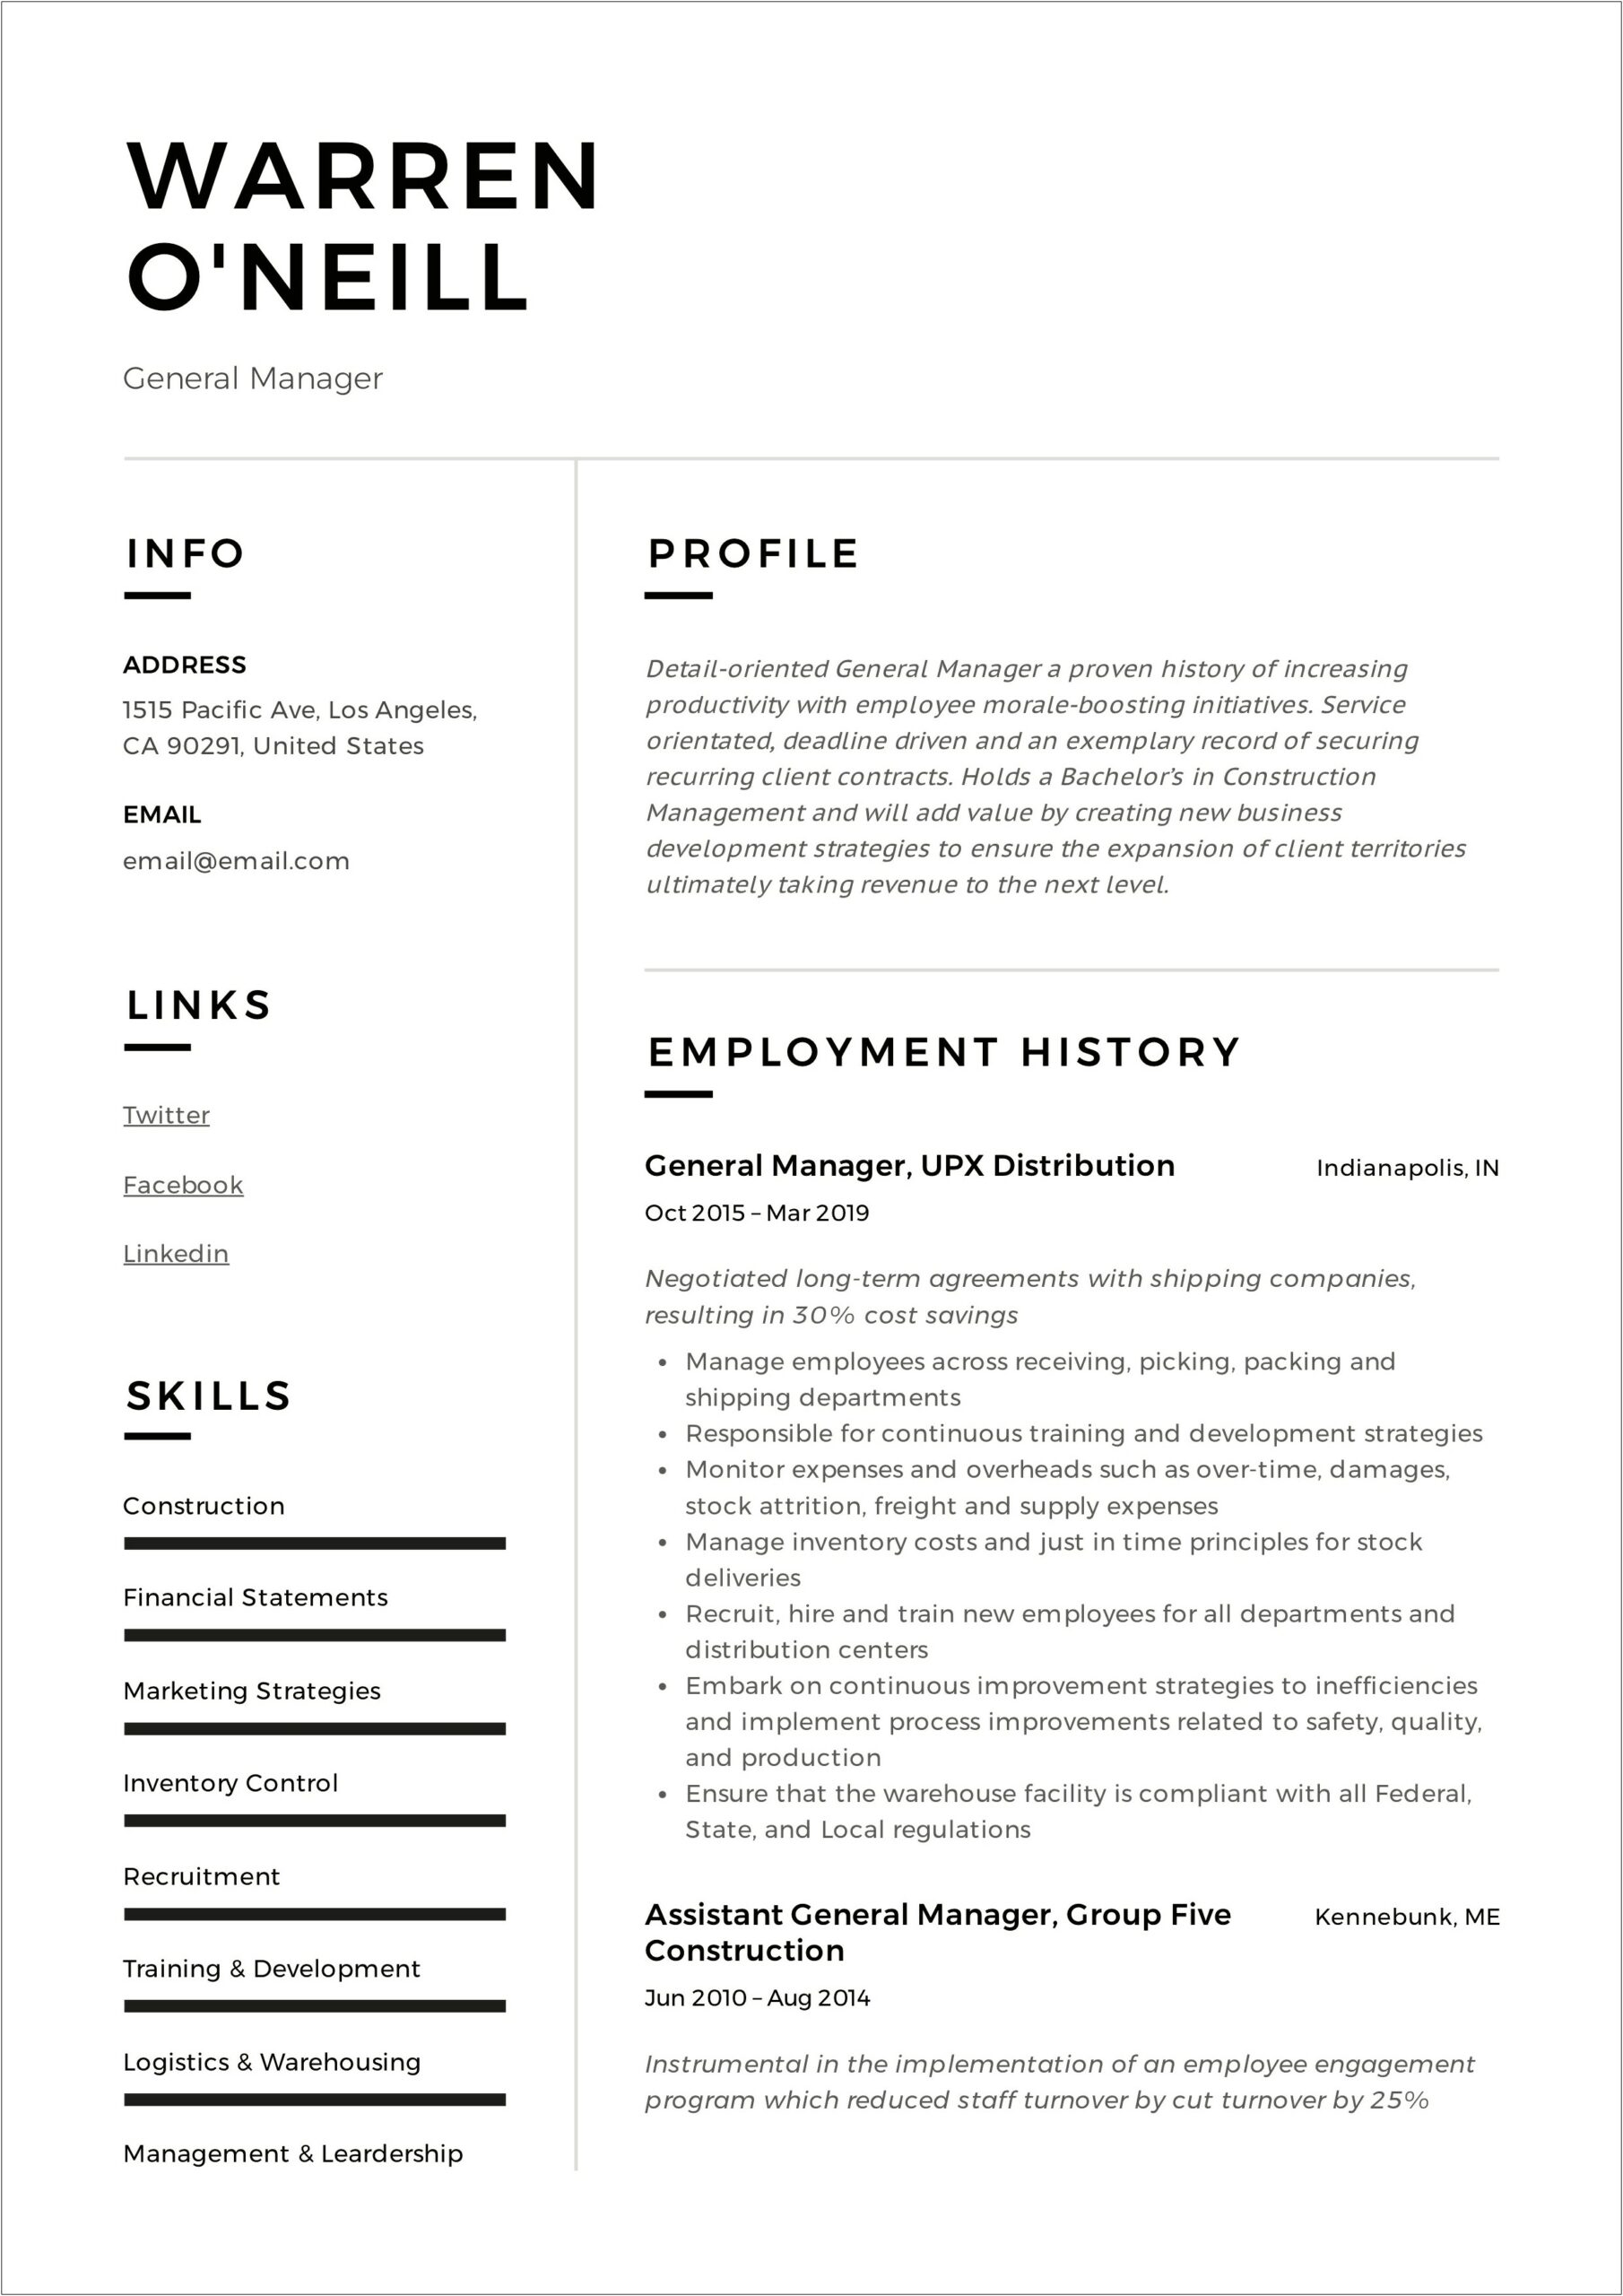 Resume Format For Duty Manager